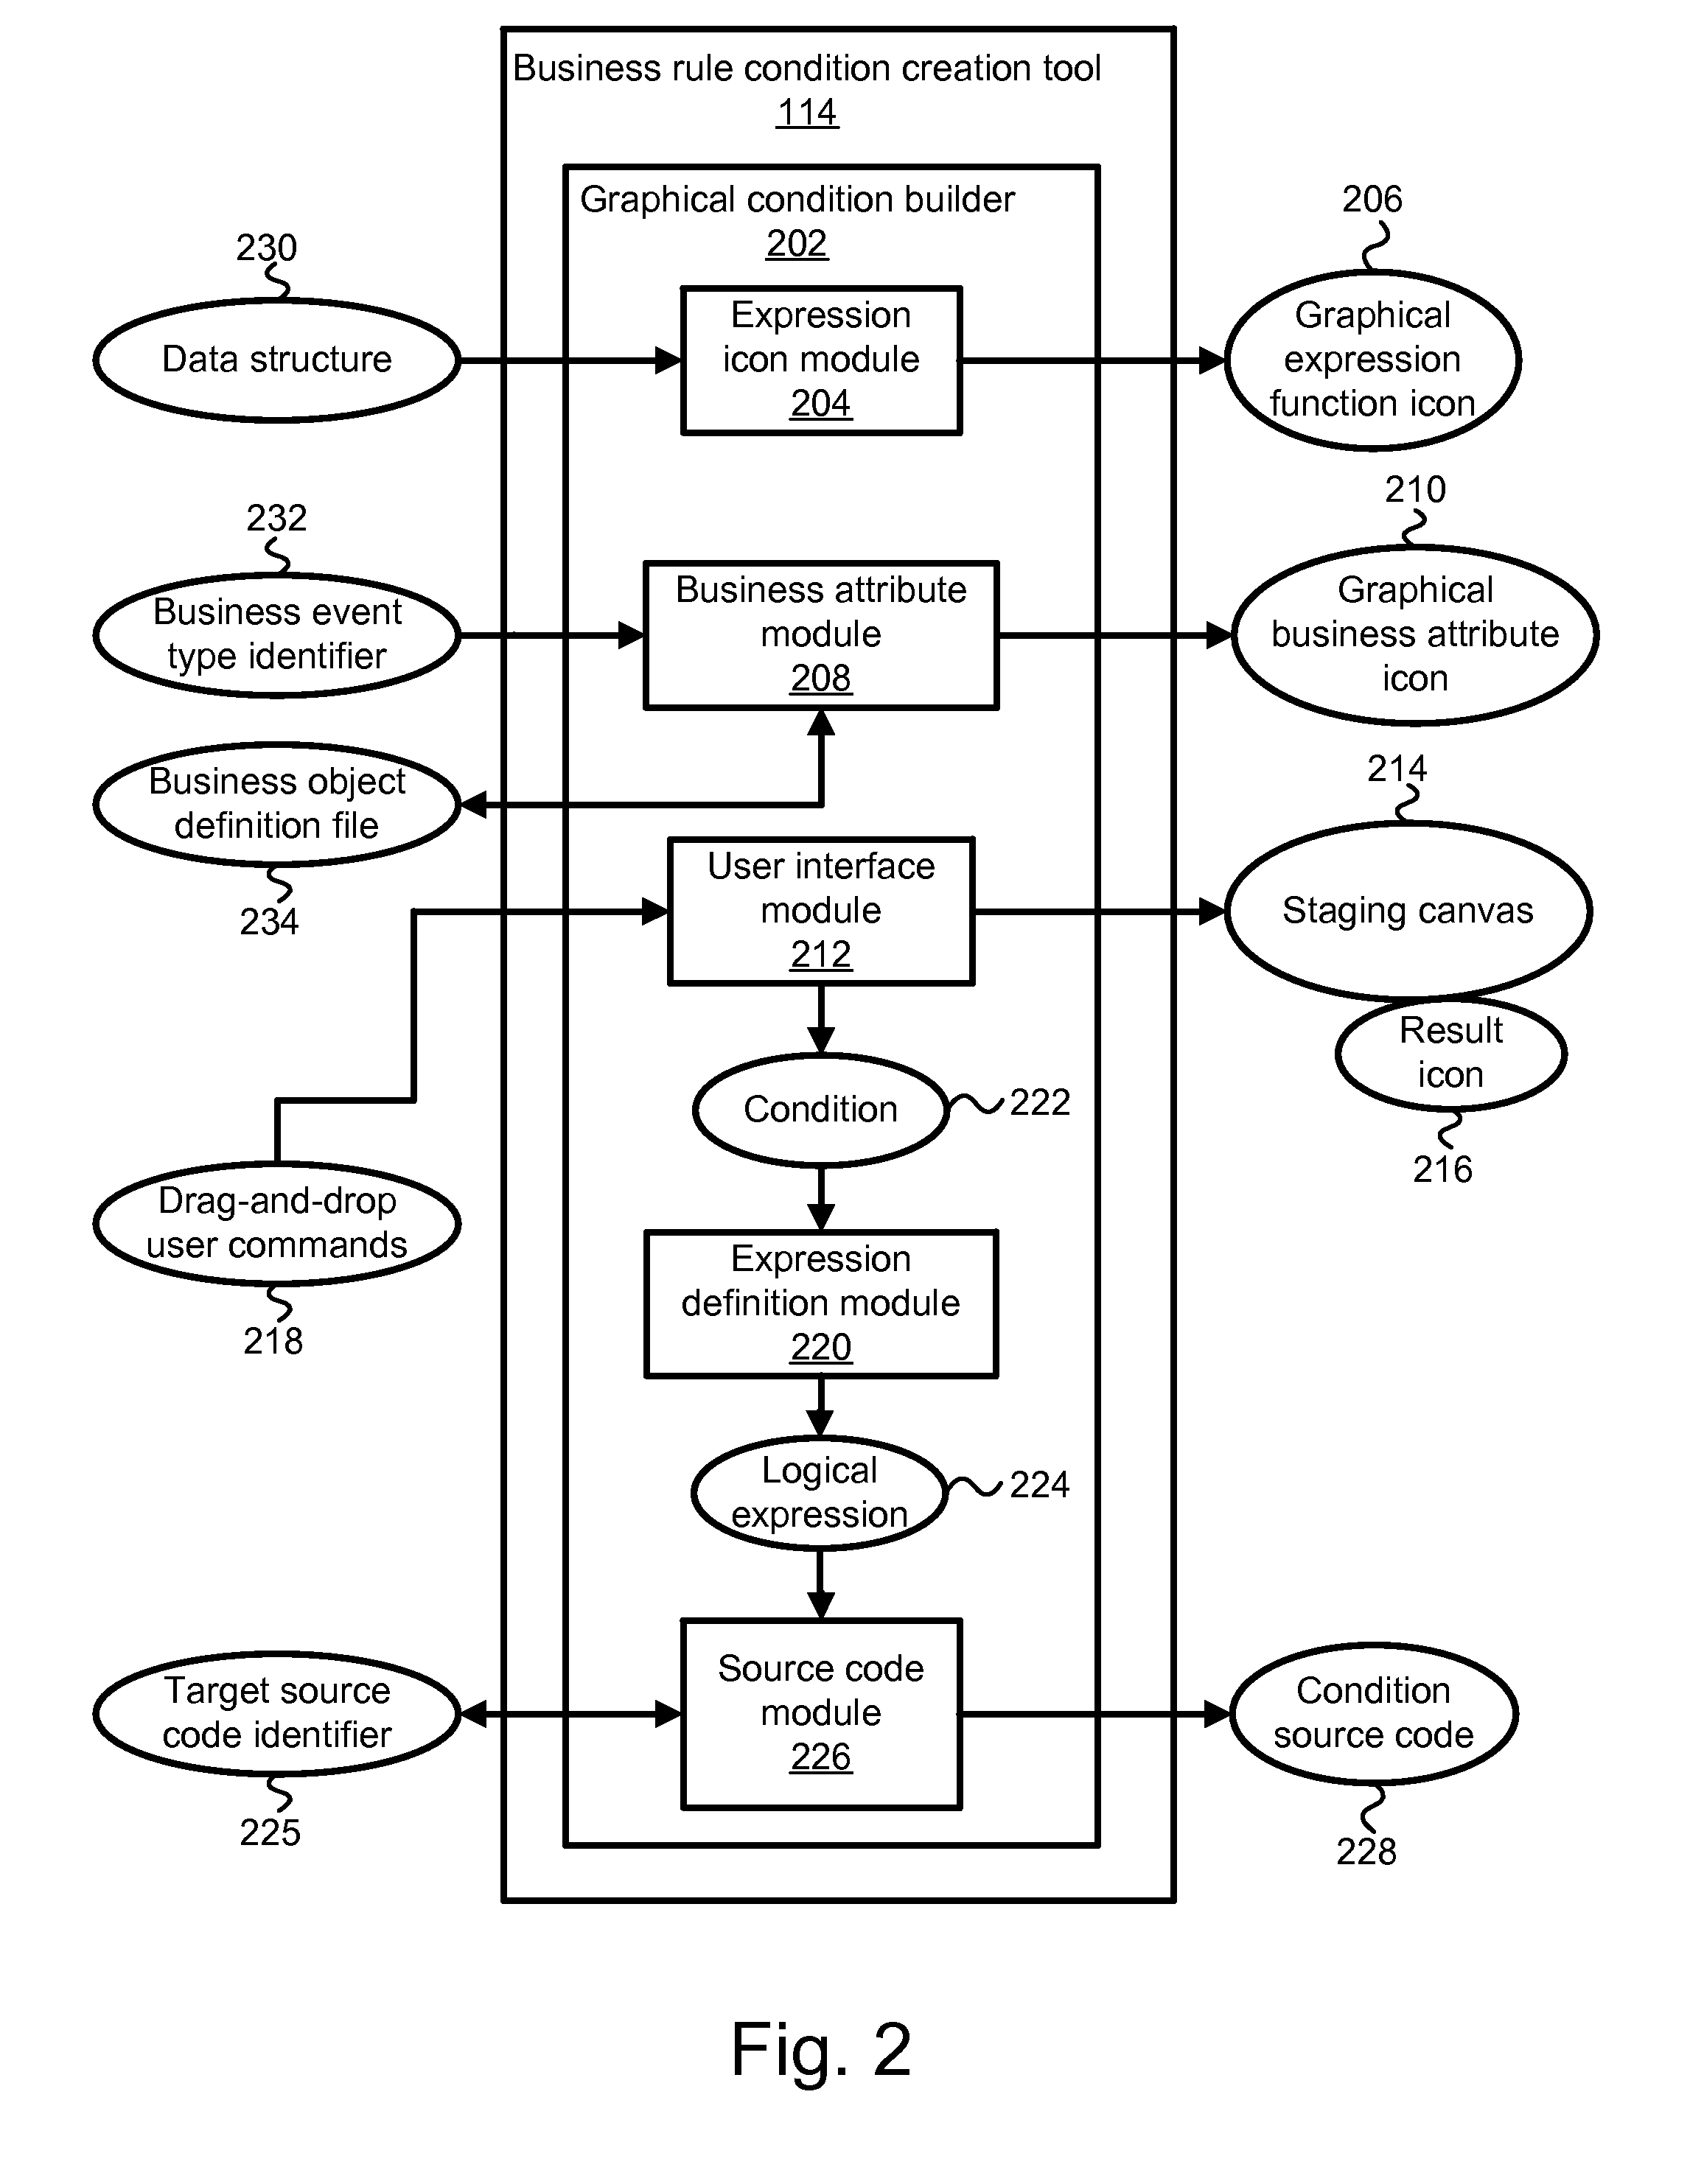 System and method for graphically building business rule conditions